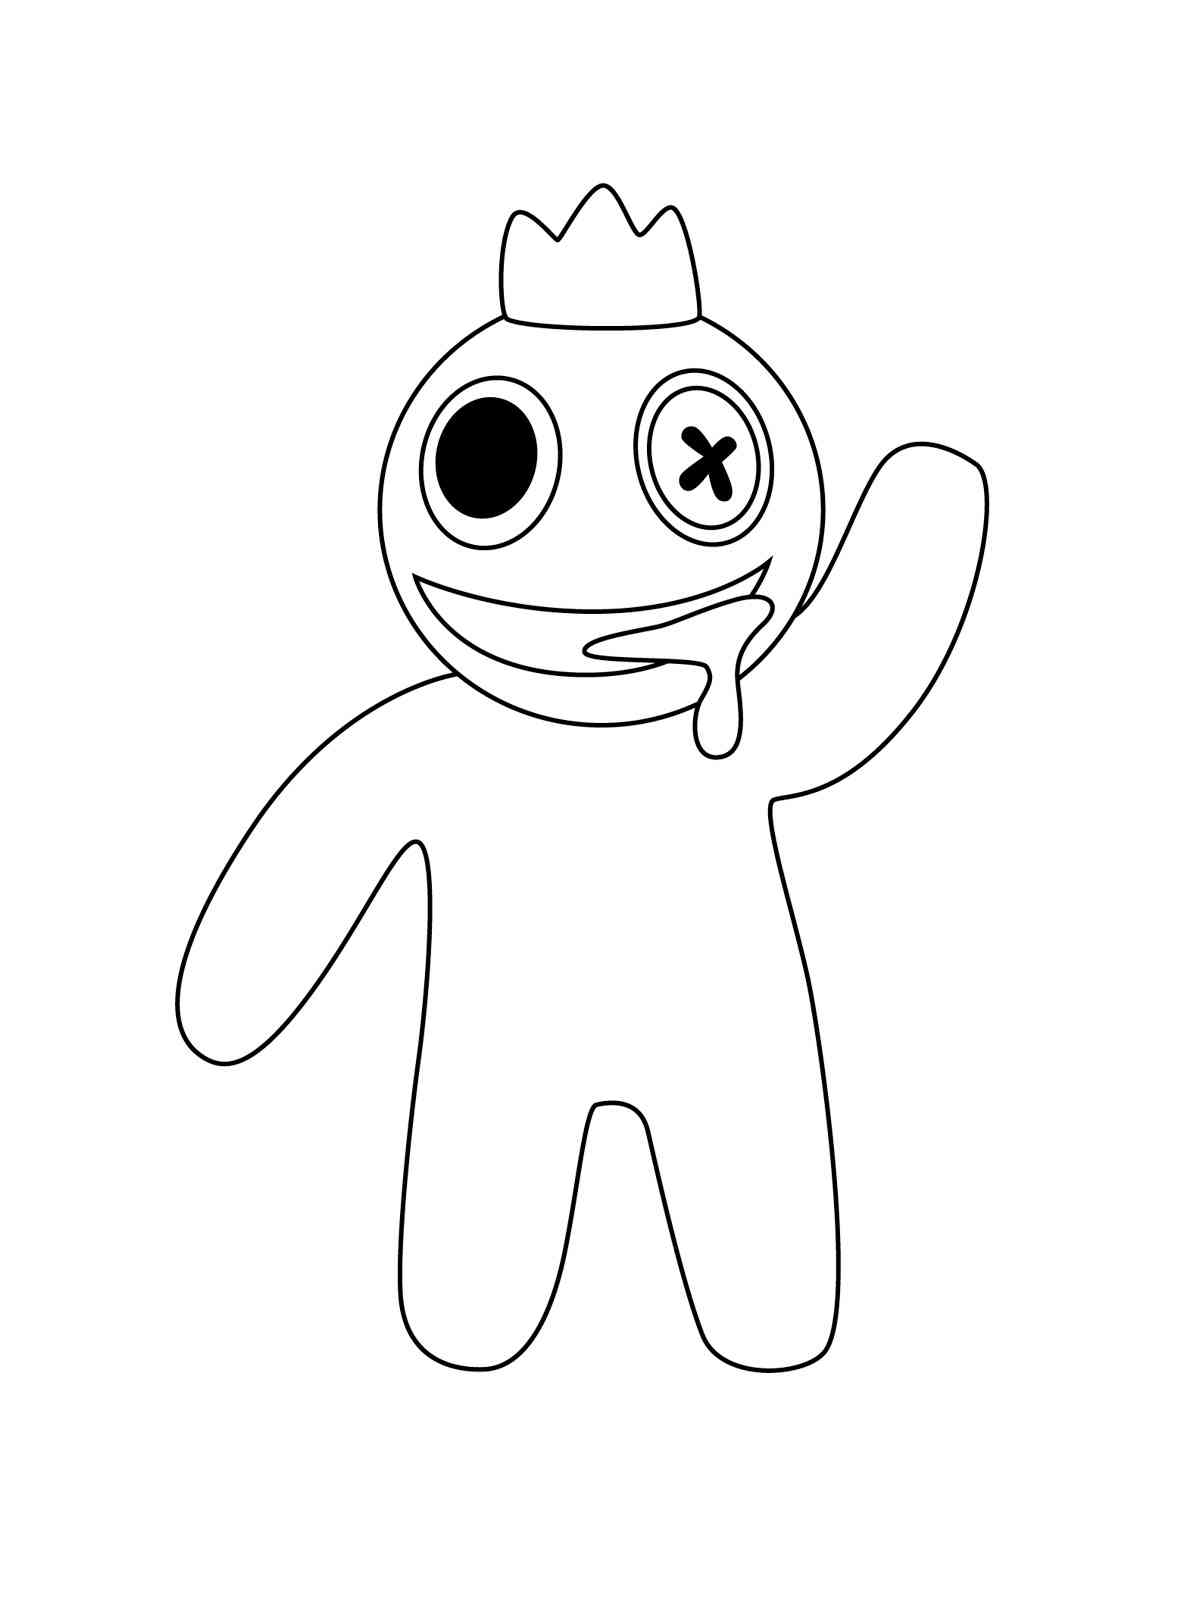 Purple Angry Rainbow Friends Roblox Coloring Page for Kids - Free